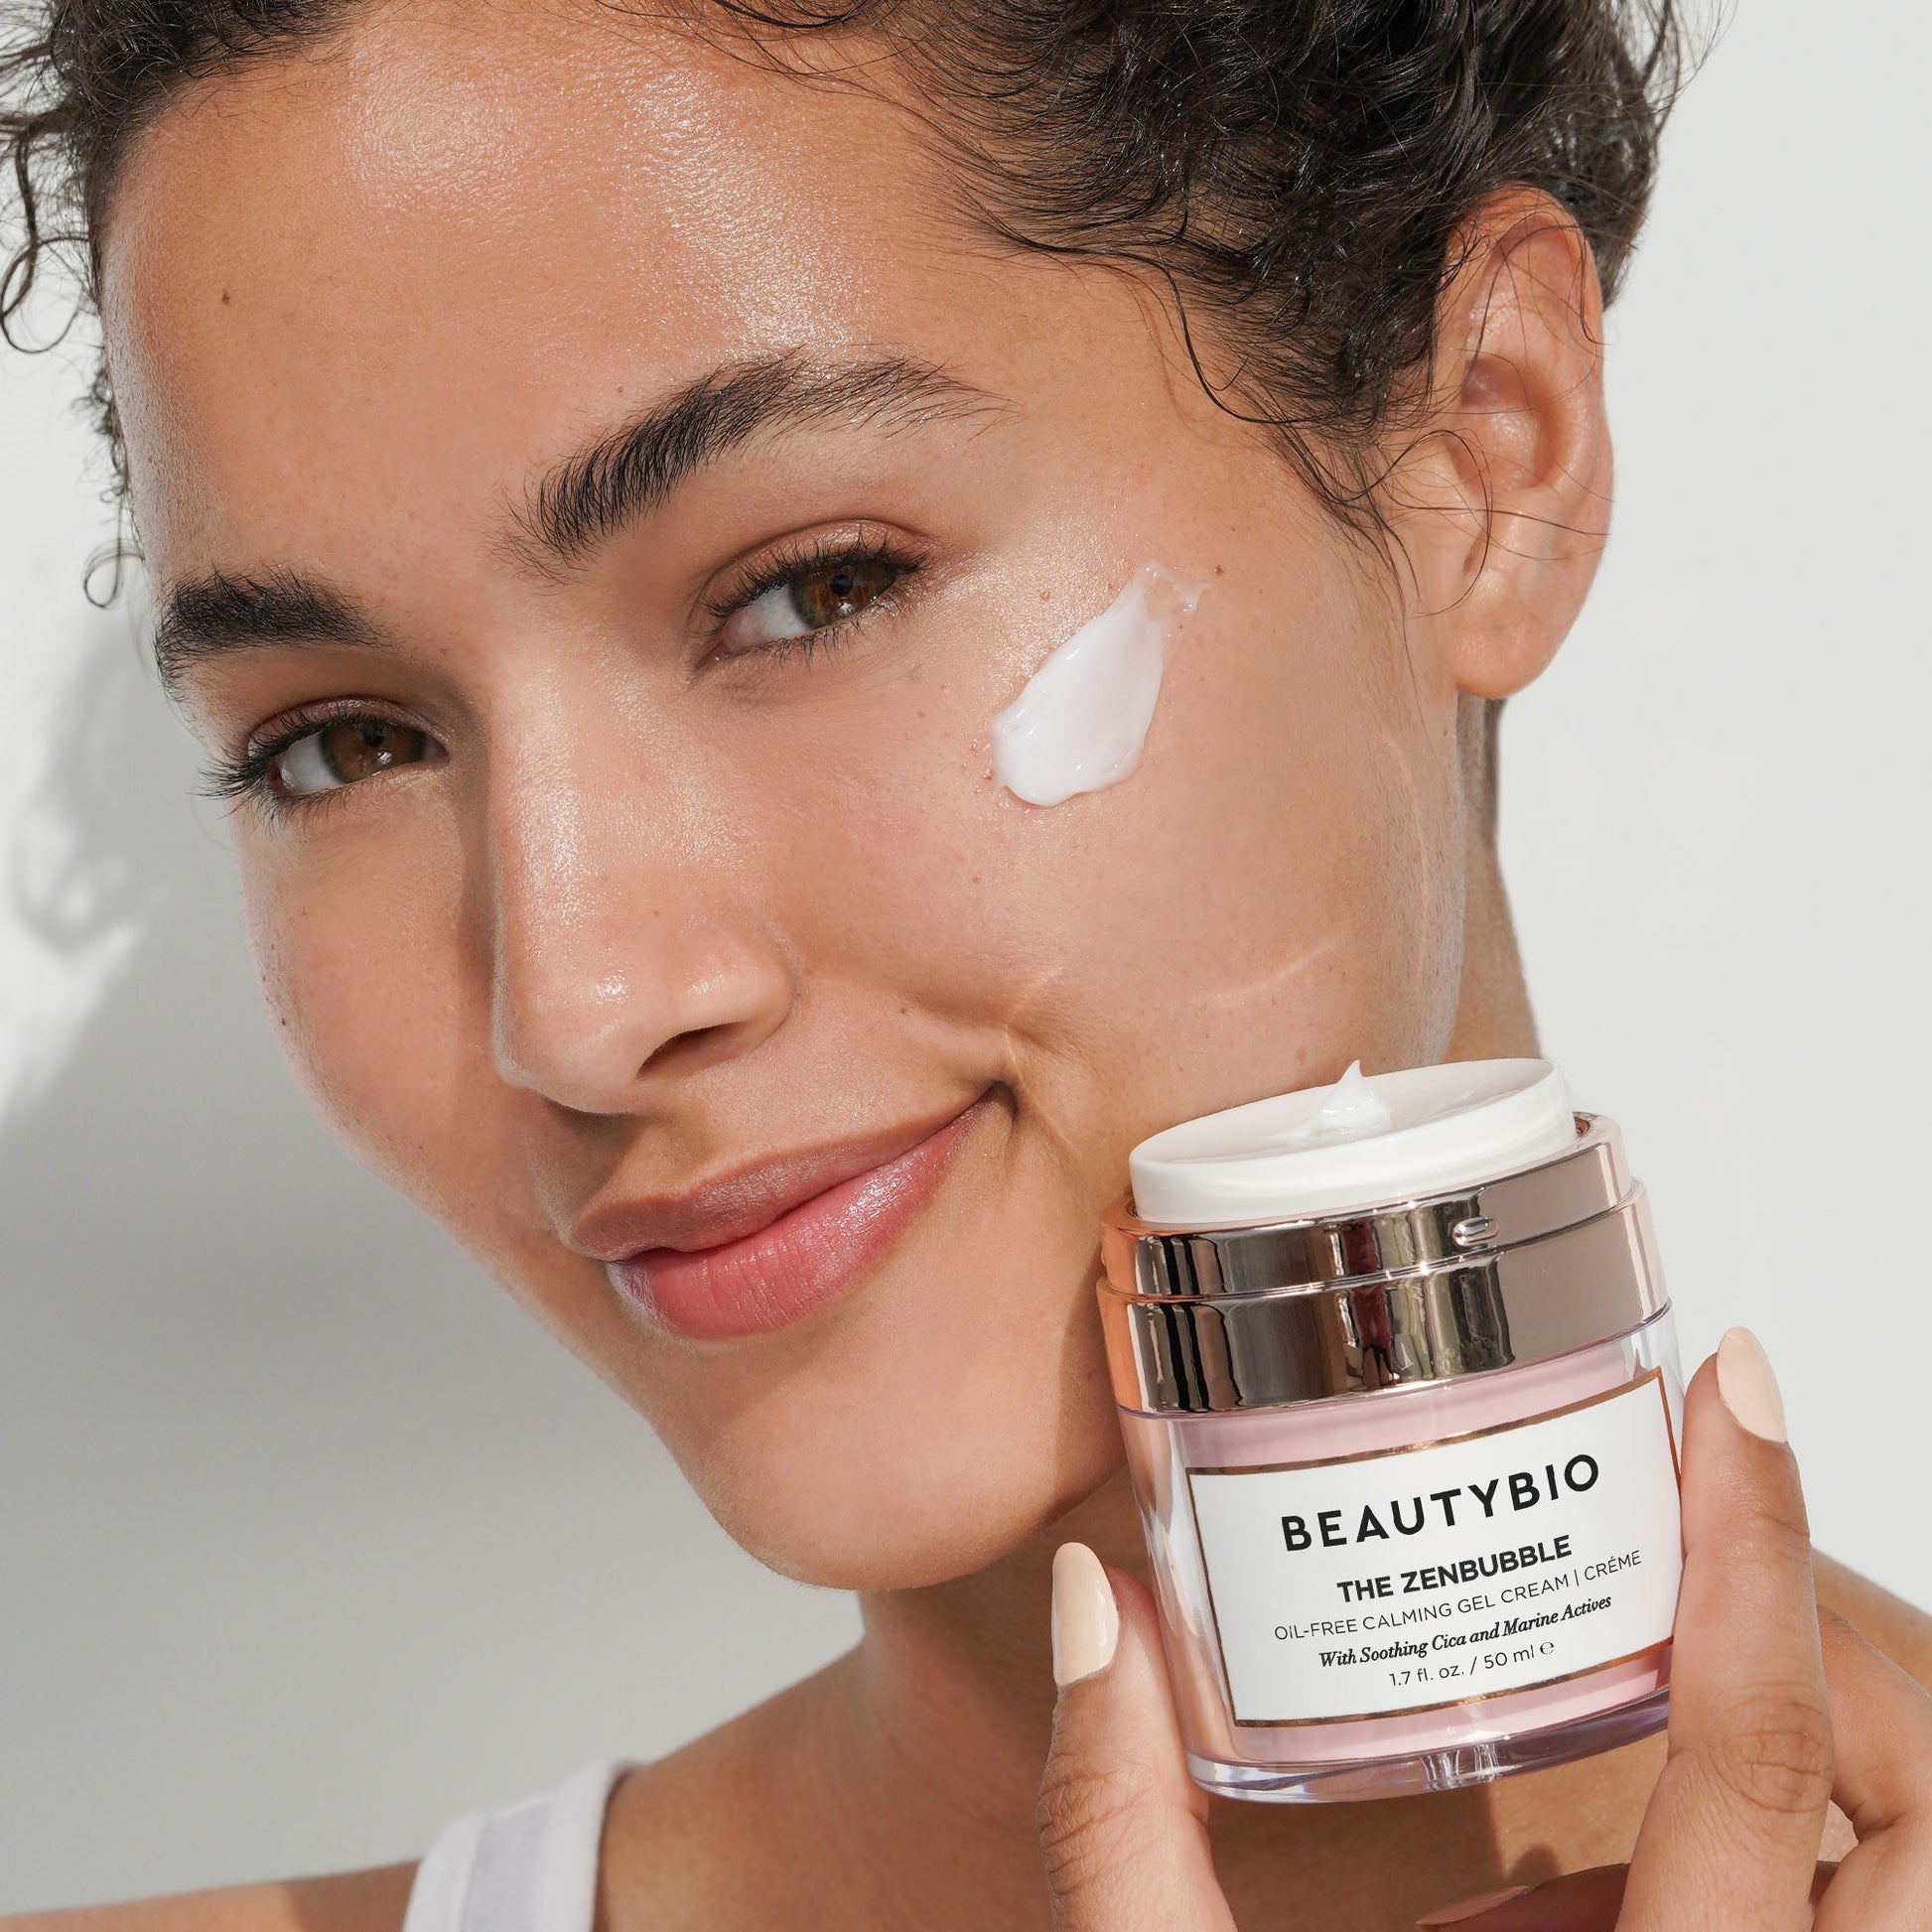 Moisturizers, Hydrating Facial Products